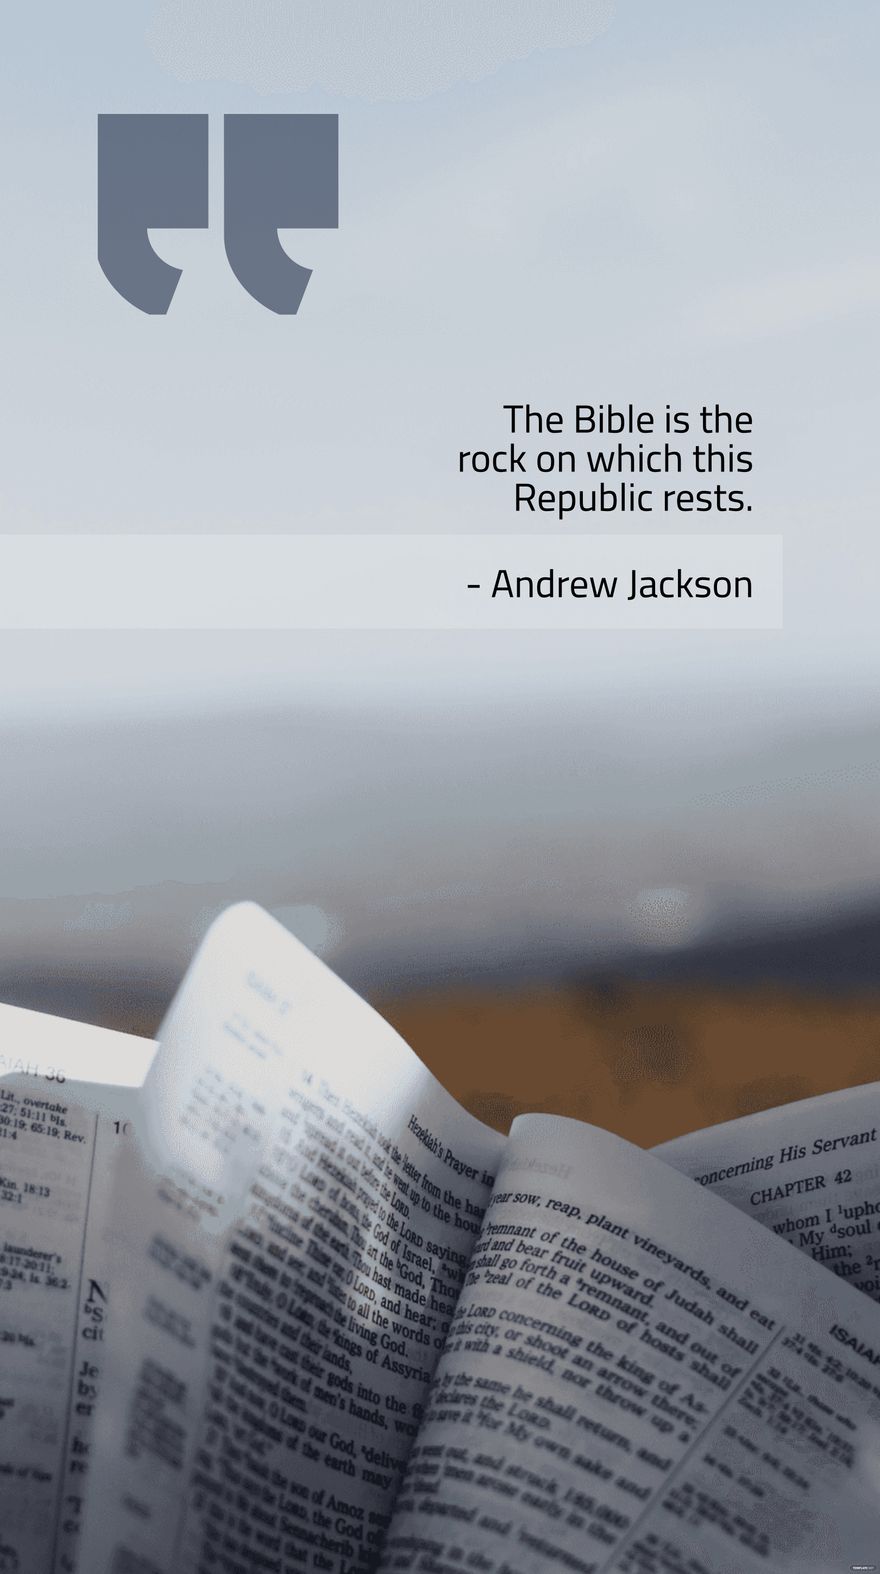 The Bible is the rock on which this Republic rests. - Andrew Jackson